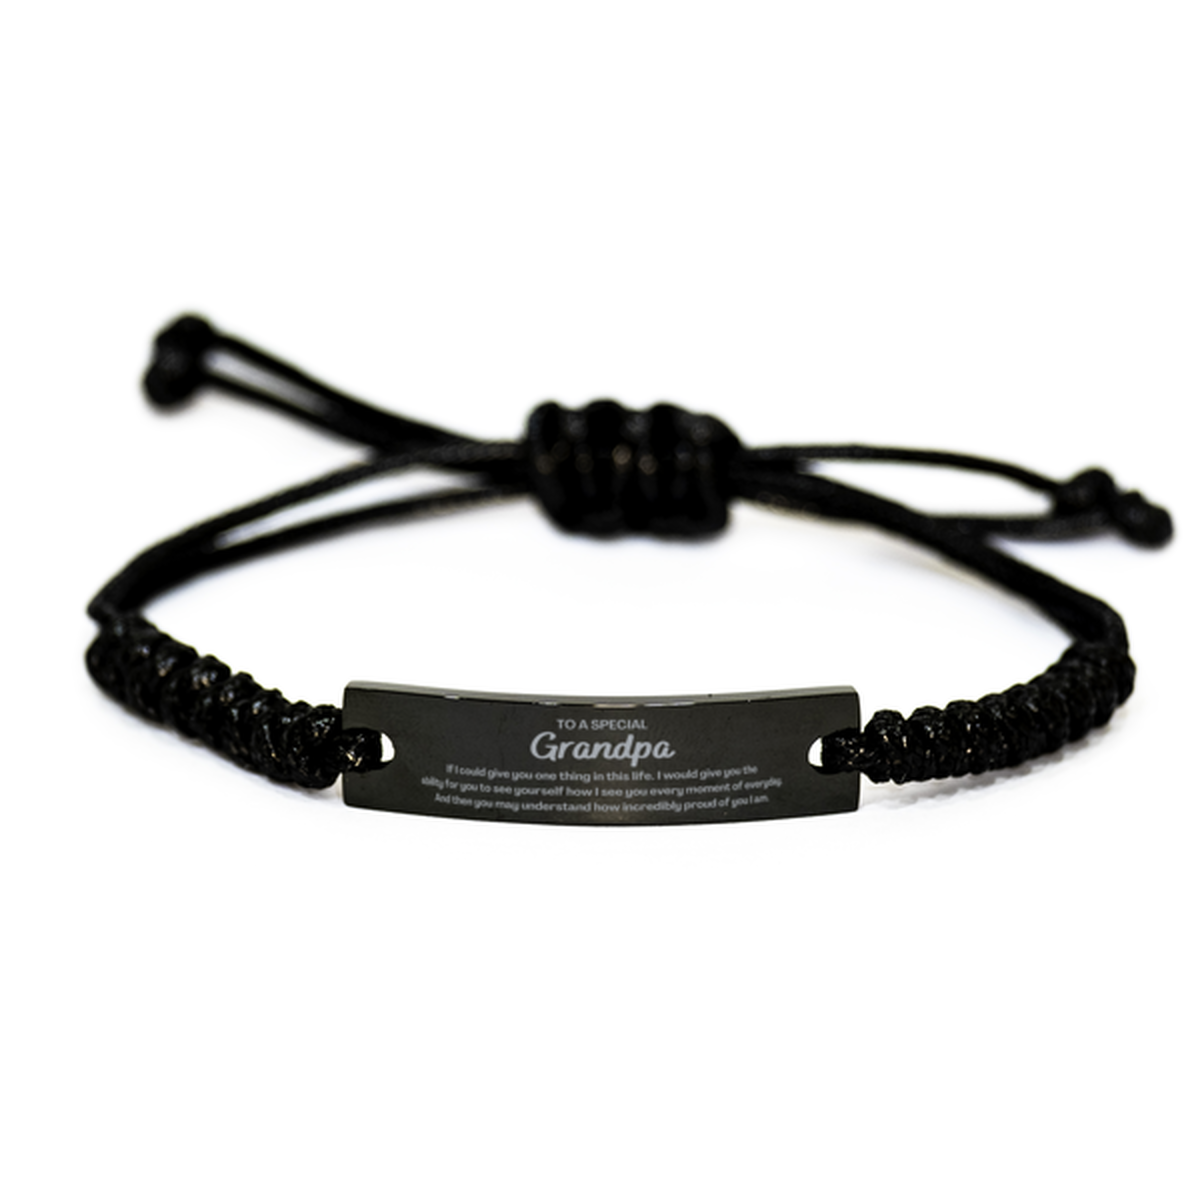 To My Grandpa Black Rope Bracelet, Gifts For Grandpa Engraved, Inspirational Gifts for Christmas Birthday, Epic Gifts for Grandpa To A Special Grandpa how incredibly proud of you I am